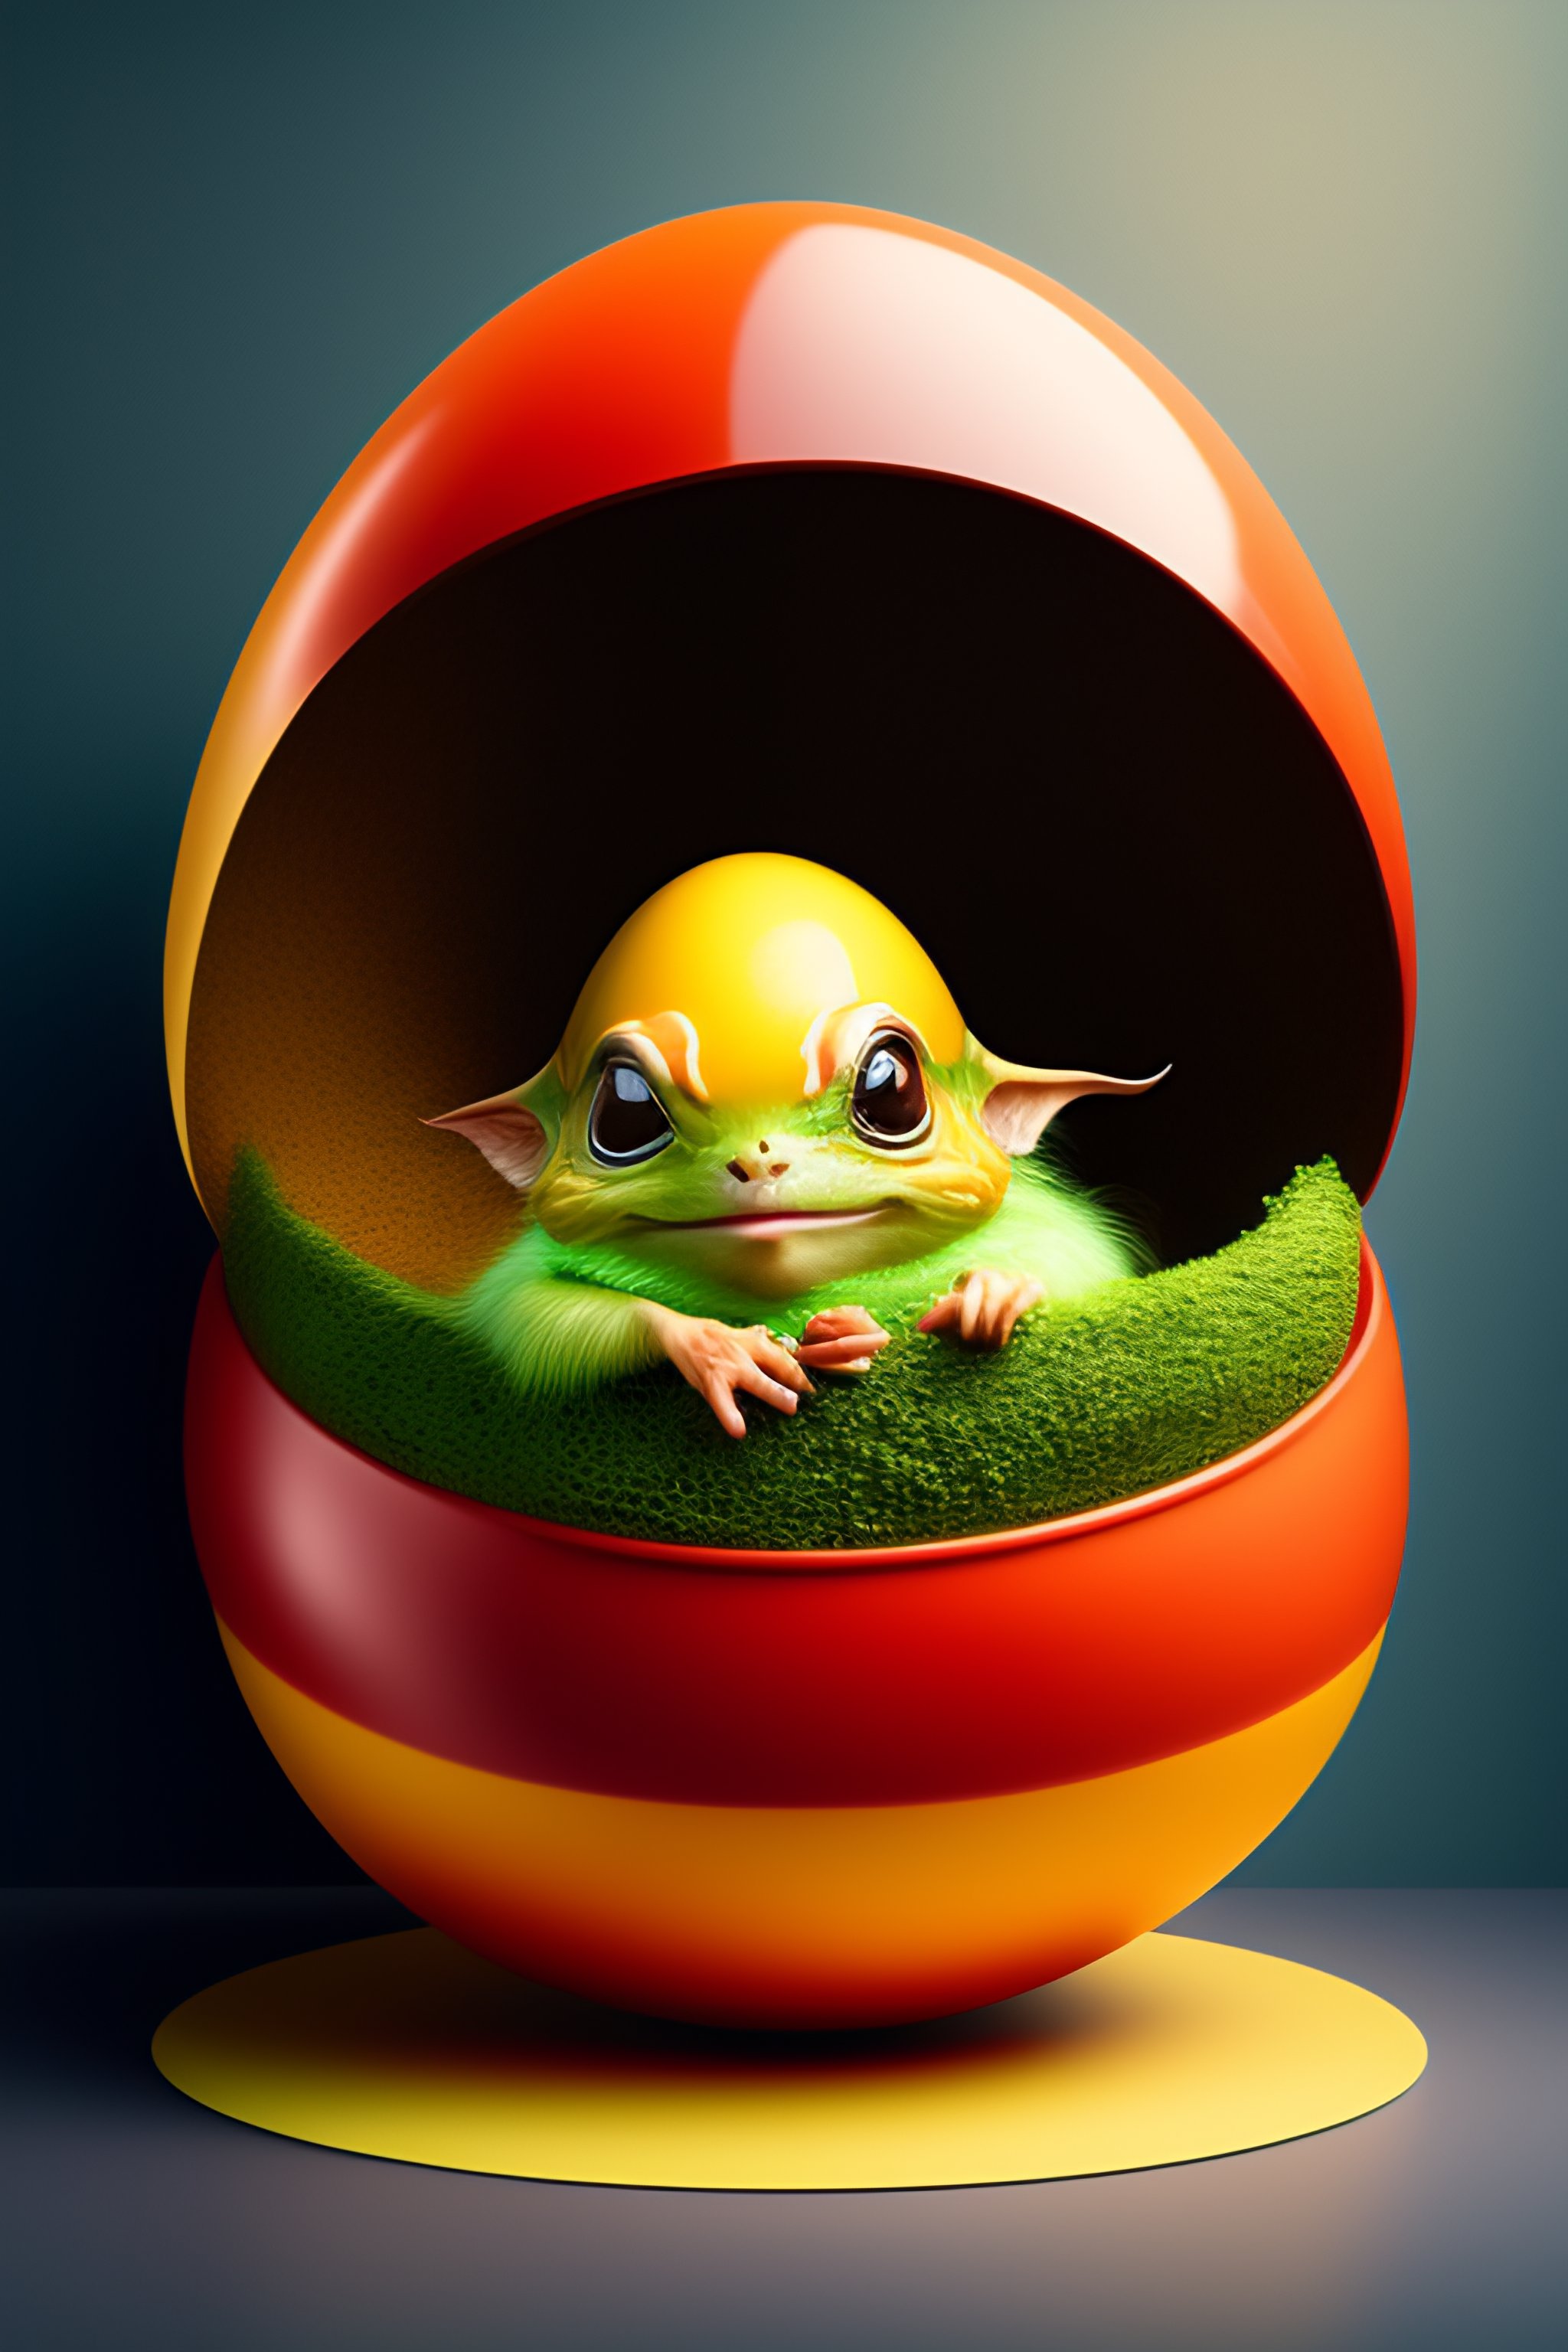 Lexica - Gremlin coming out of a giant egg holding an easter egg ...